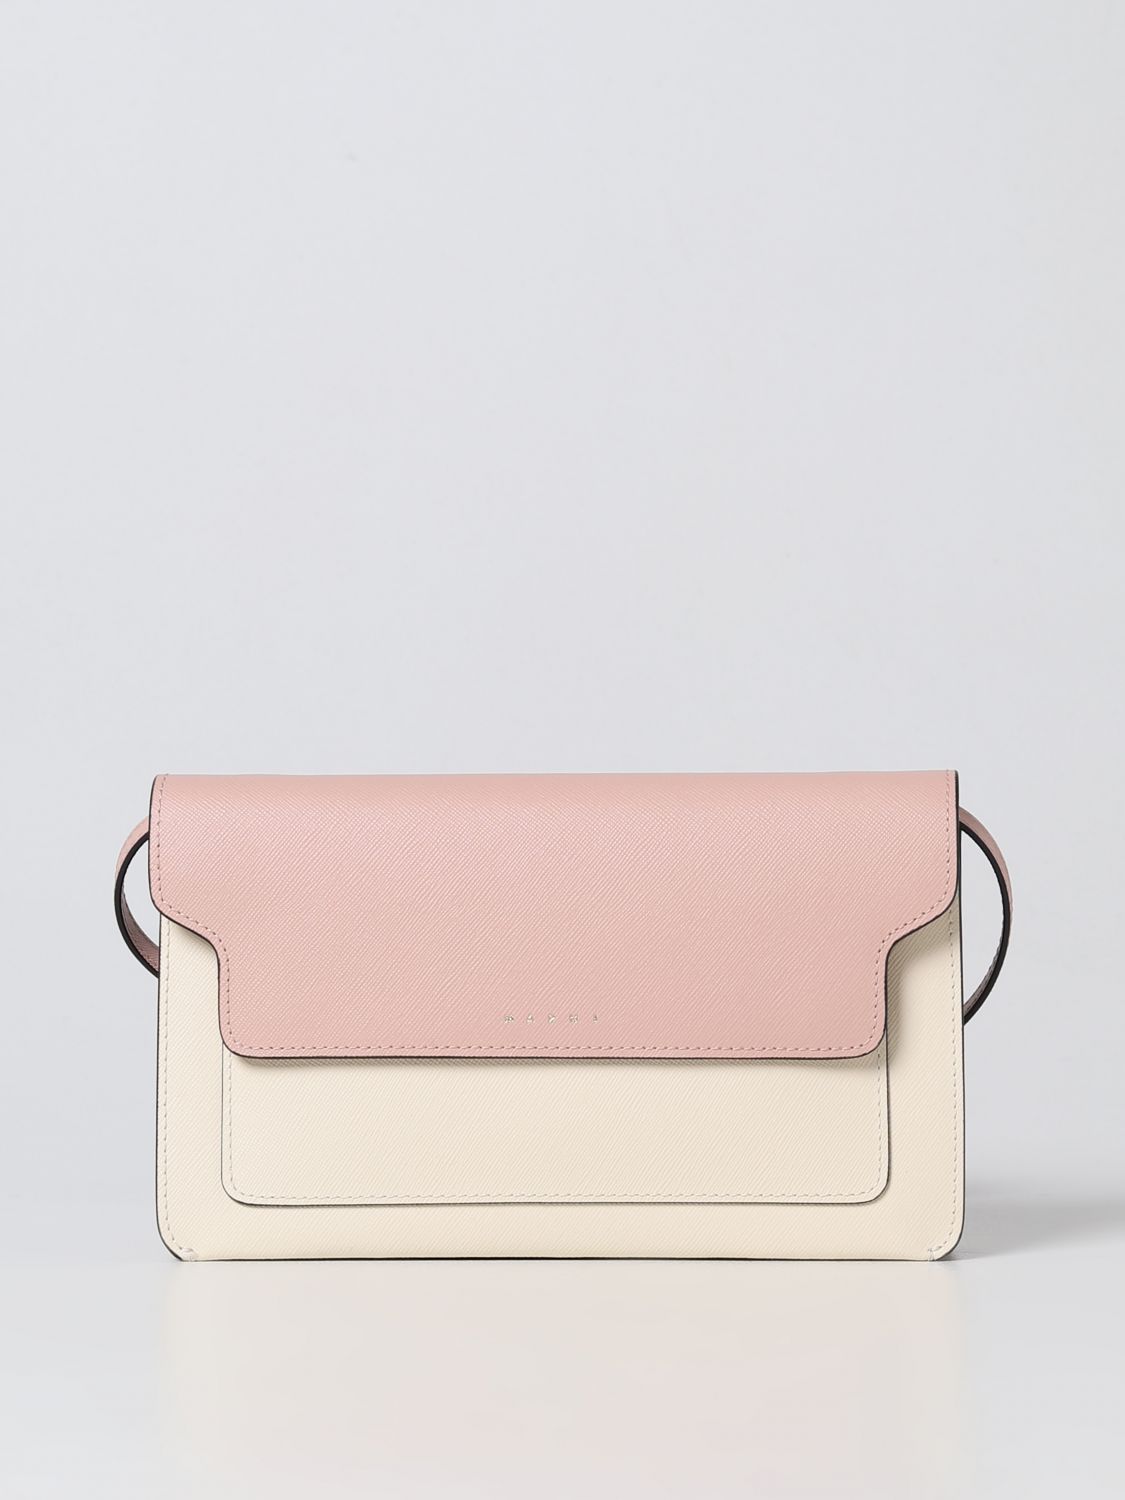 Marni 3 Comp Pouch With Strap Crossbody Bag In Blush Pink